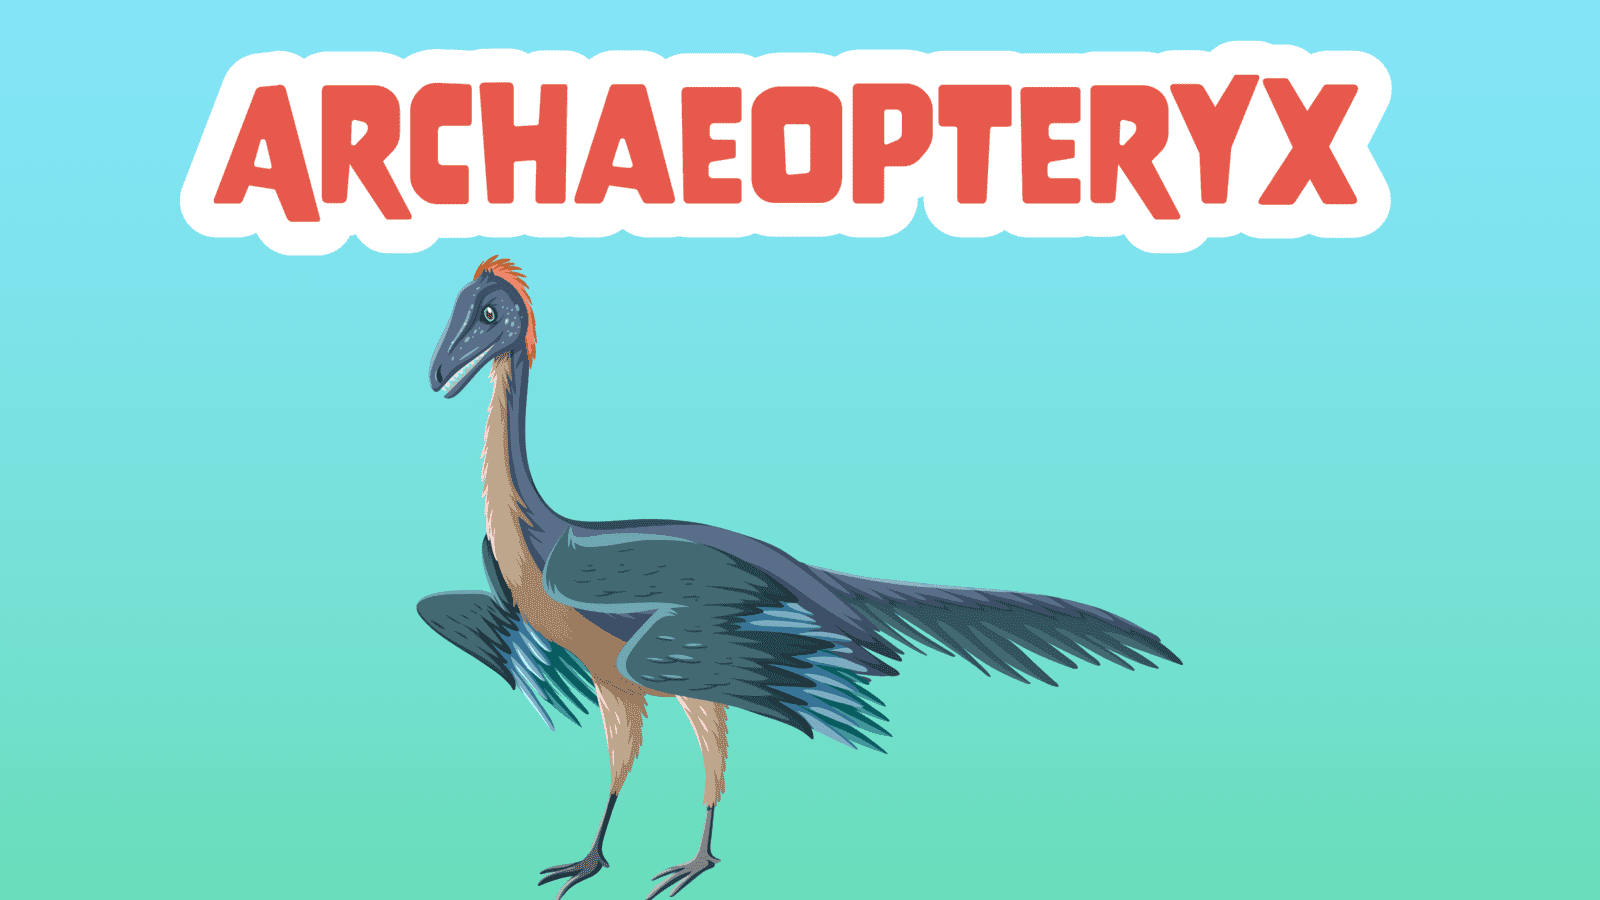 Archaeopteryx Facts for Kids – 5 Adorable Facts about Archaeopteryx